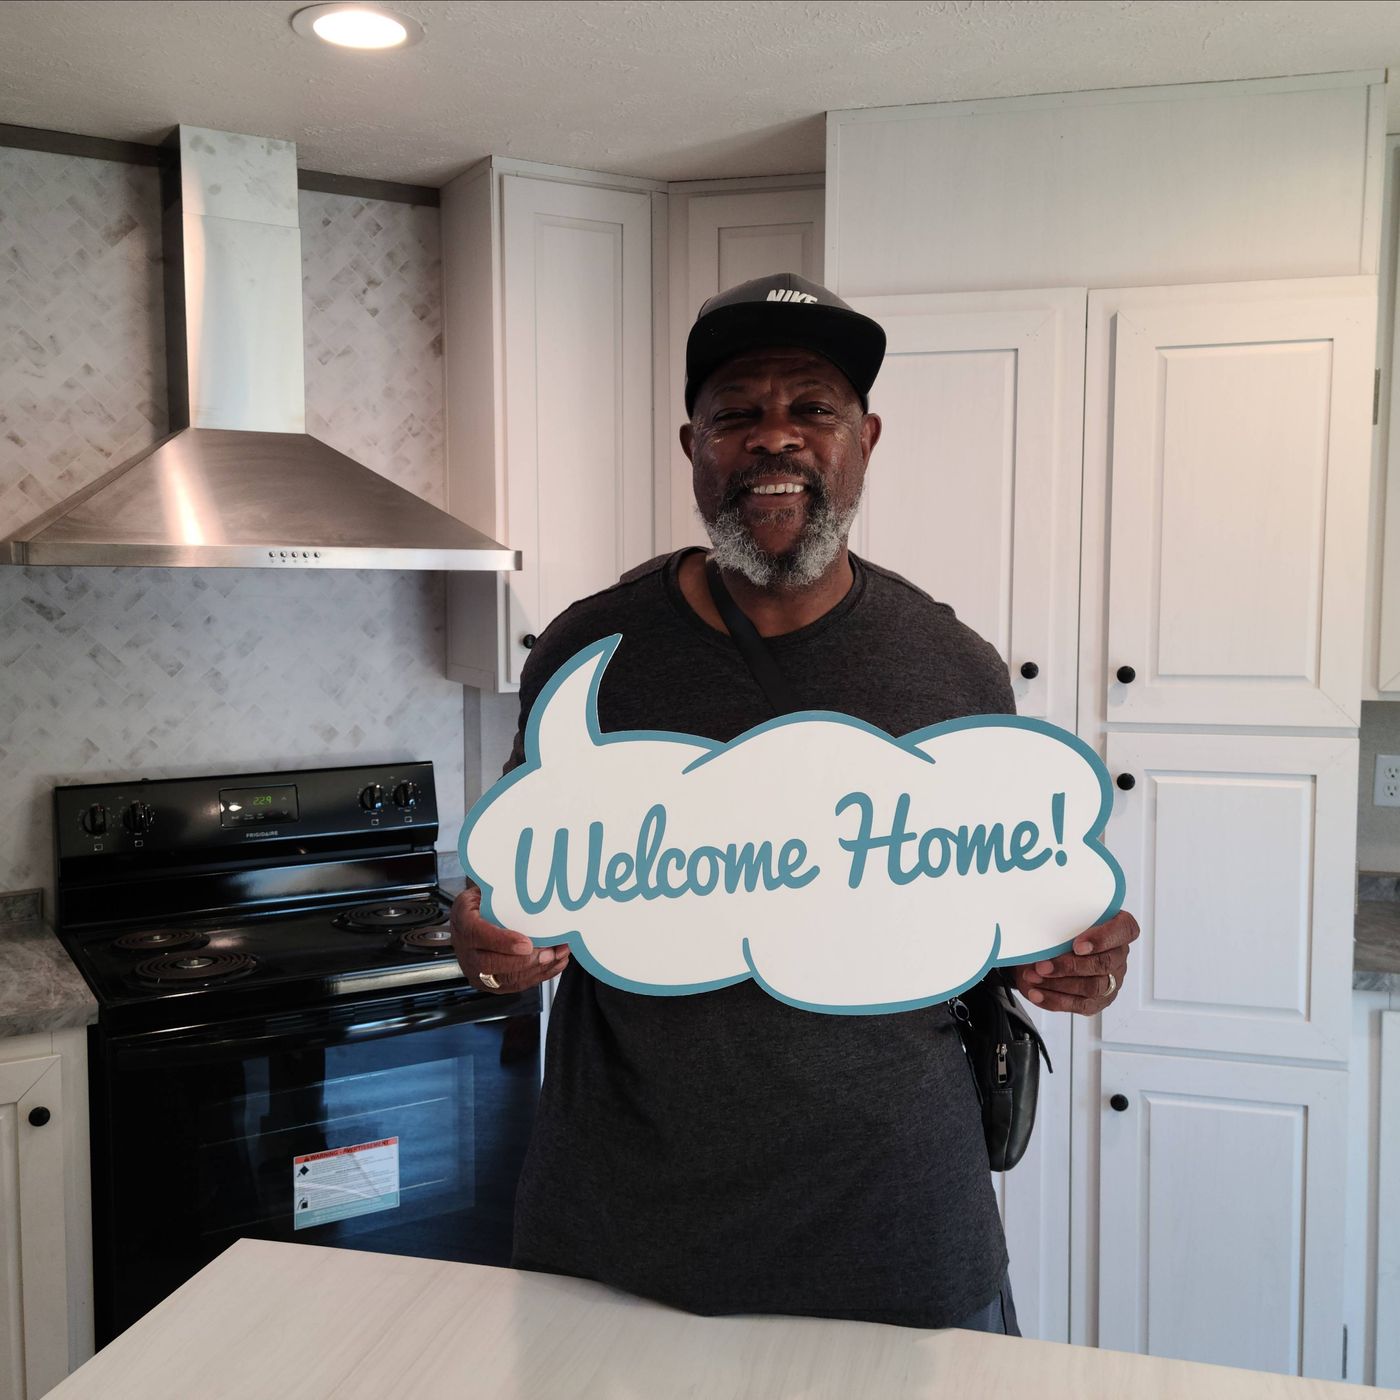 CLARENCE J. welcome home image